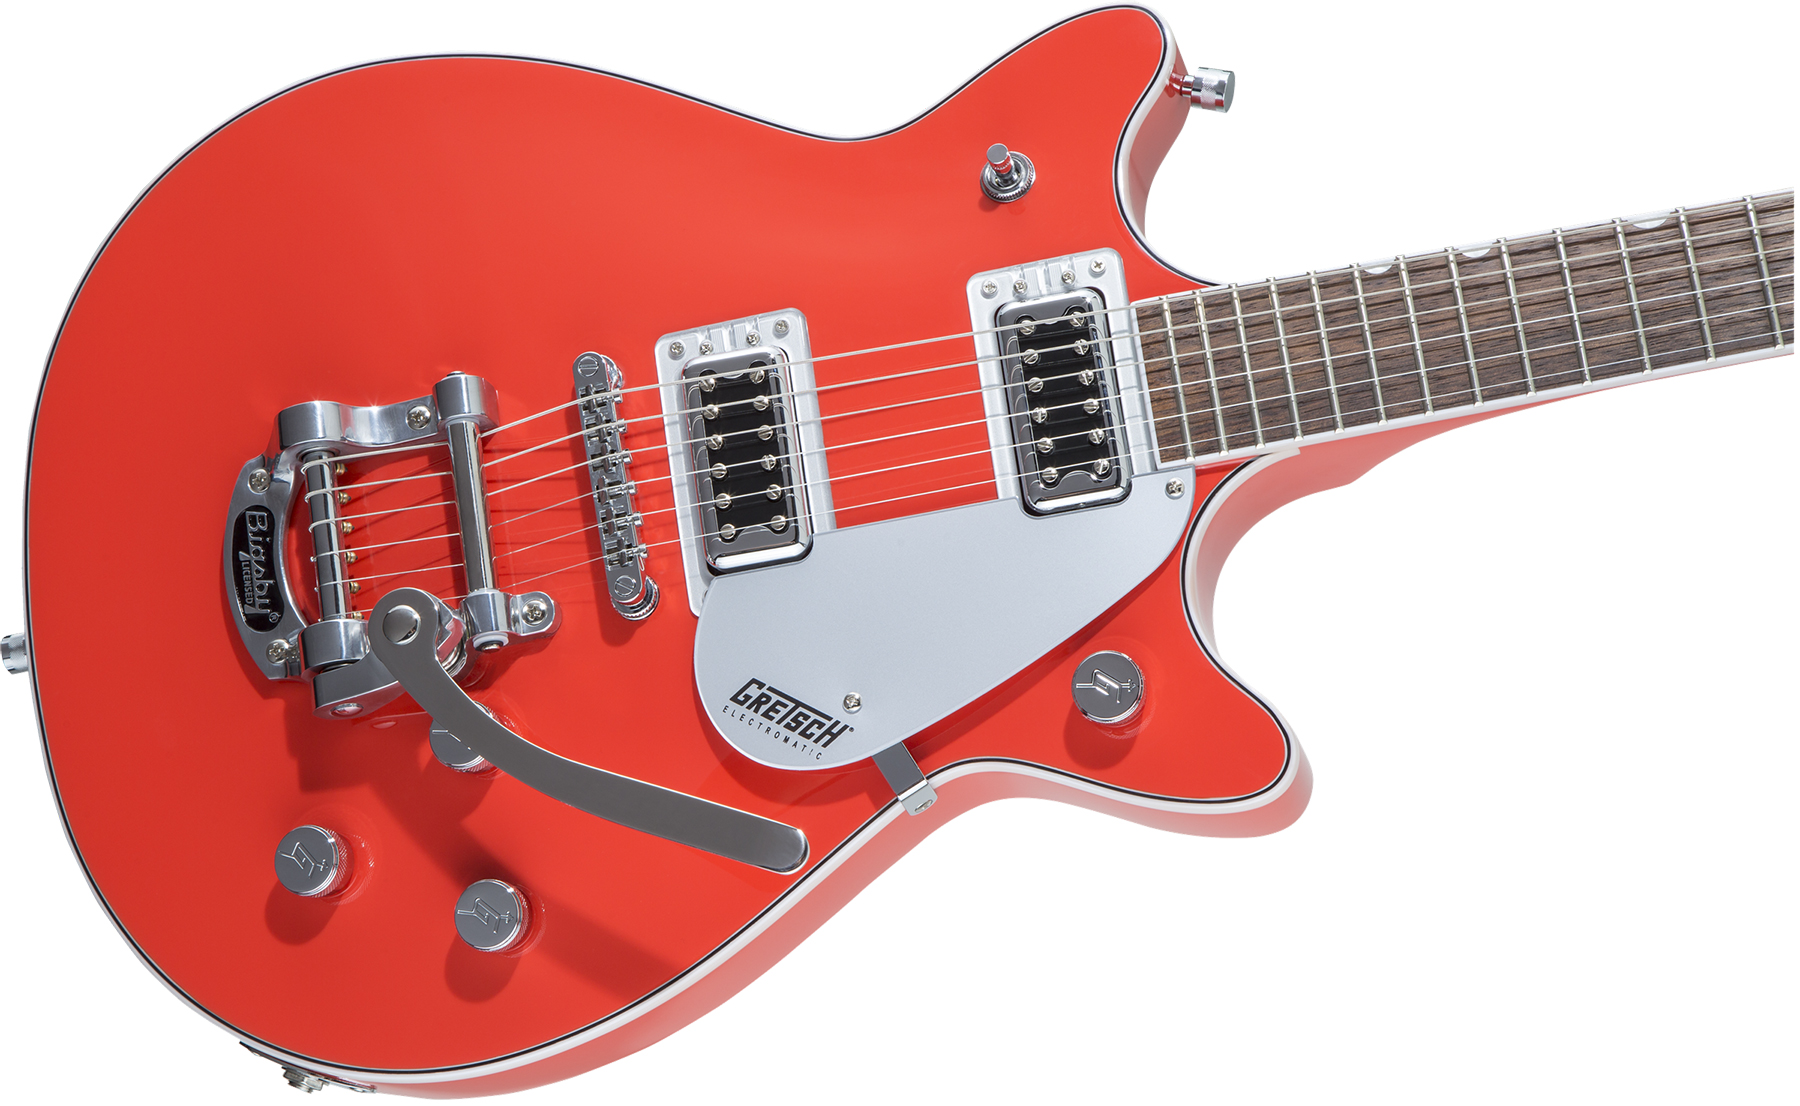 Gretsch G5232t Electromatic Double Jet Ft 2019 Hh Bigsby Lau - Tahiti Red - Double cut electric guitar - Variation 2